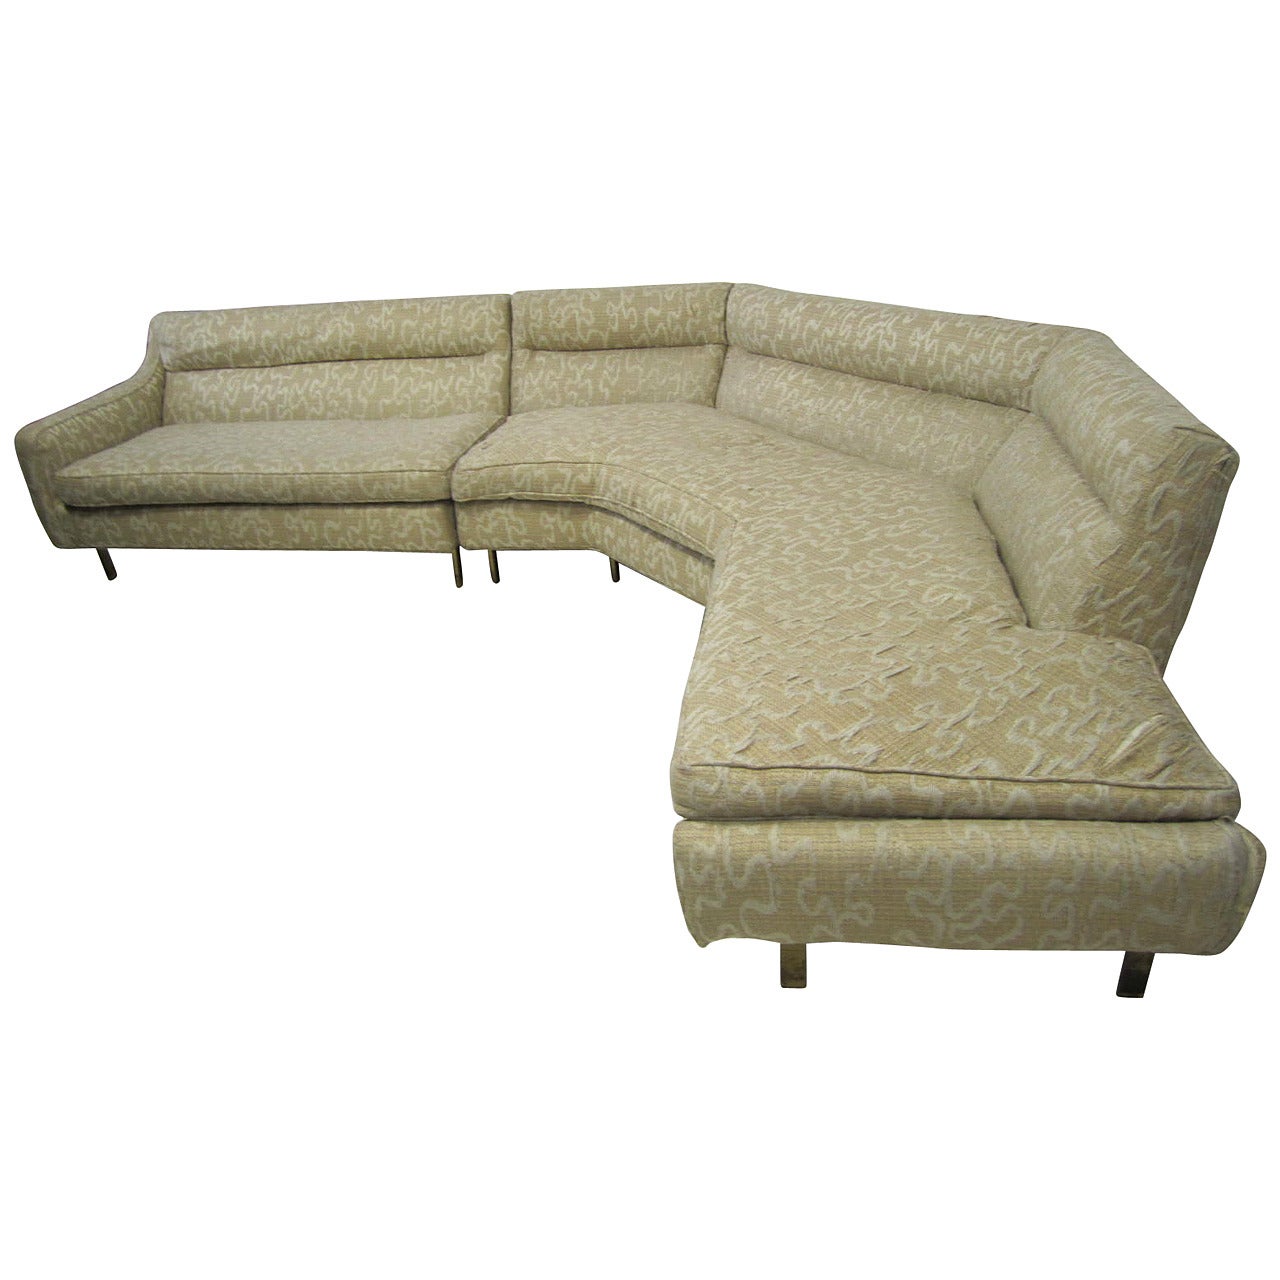 Stunning Harvey Probber Style Two-Piece Sectional Sofa with Solid Bronze Legs